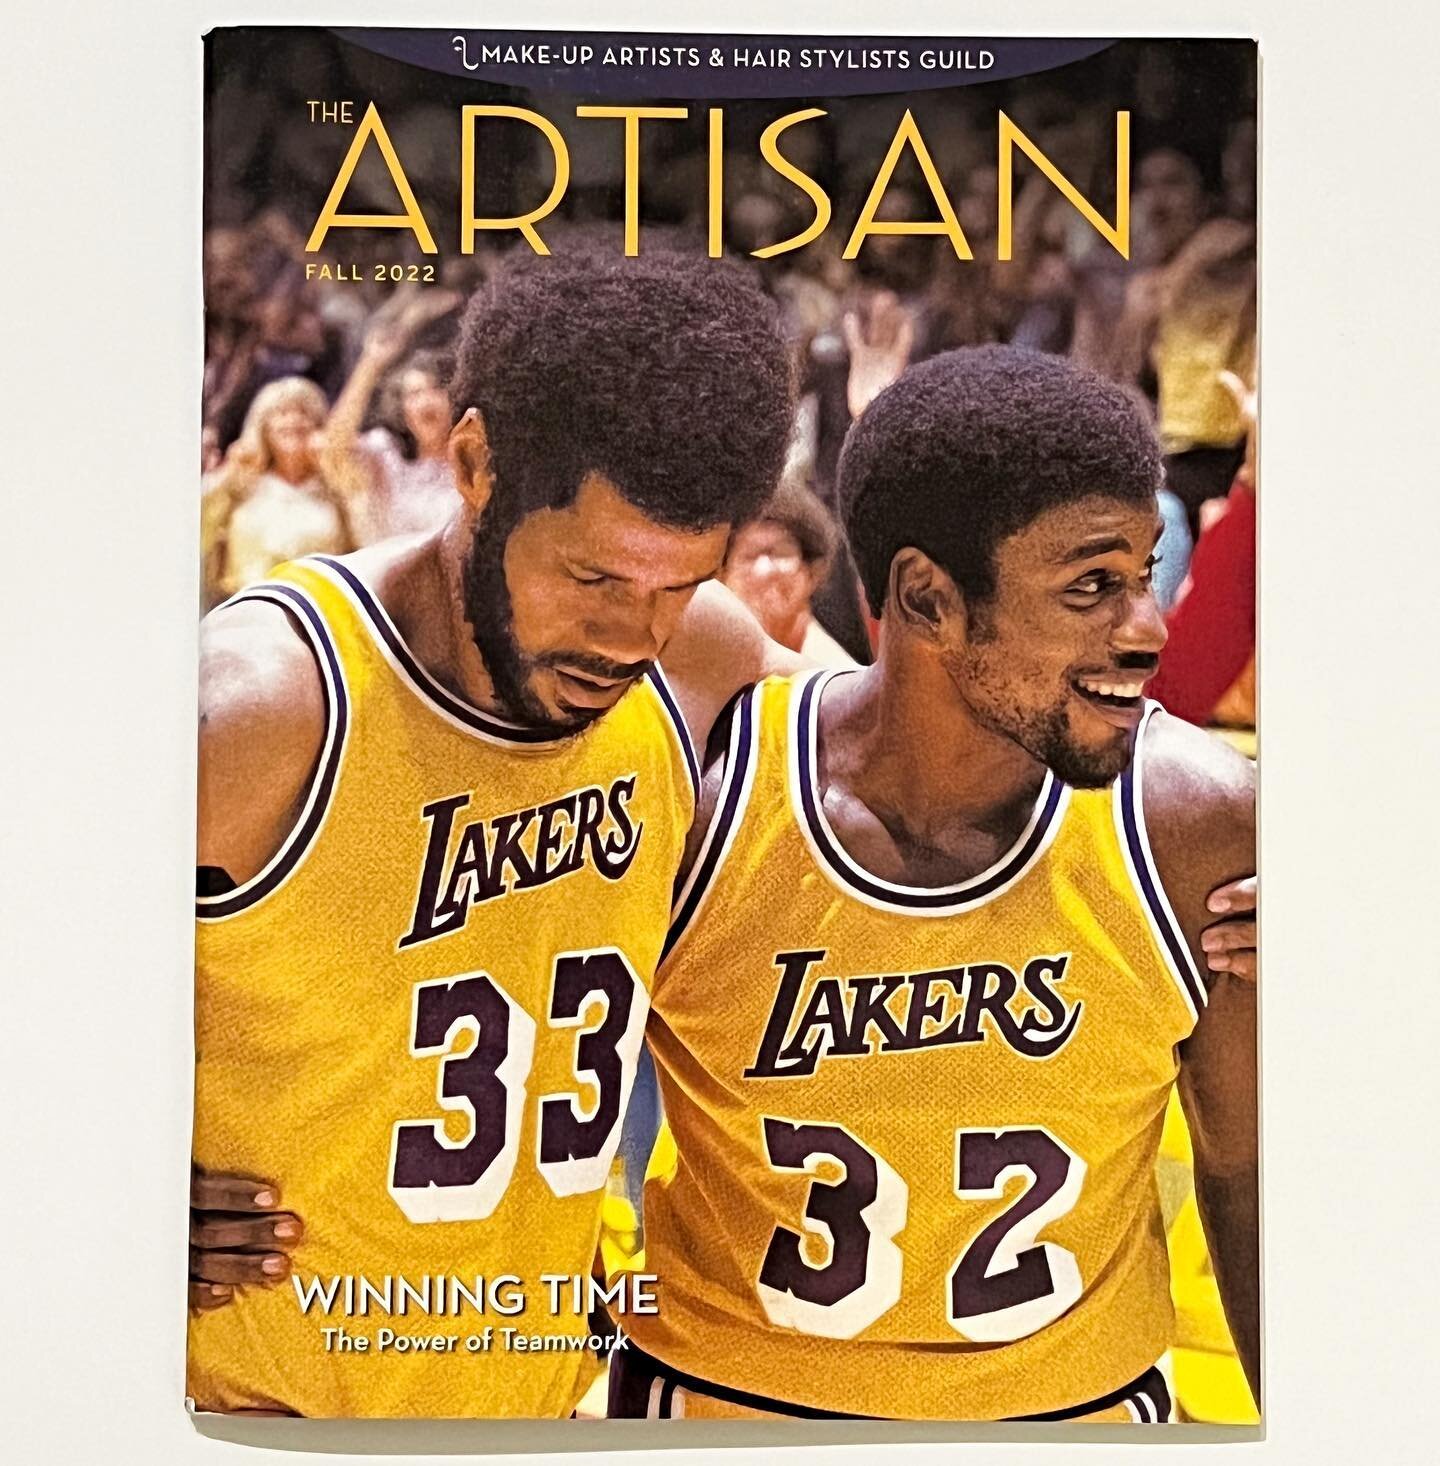 Wow, what an honor to come home &amp; find one of my @winningtimehbo make ups on the front cover of the @local_706 Artisan magazine. 

So much blood, sweat &amp; tears went into making these characters come to life &amp; I loved every minute of it! 
